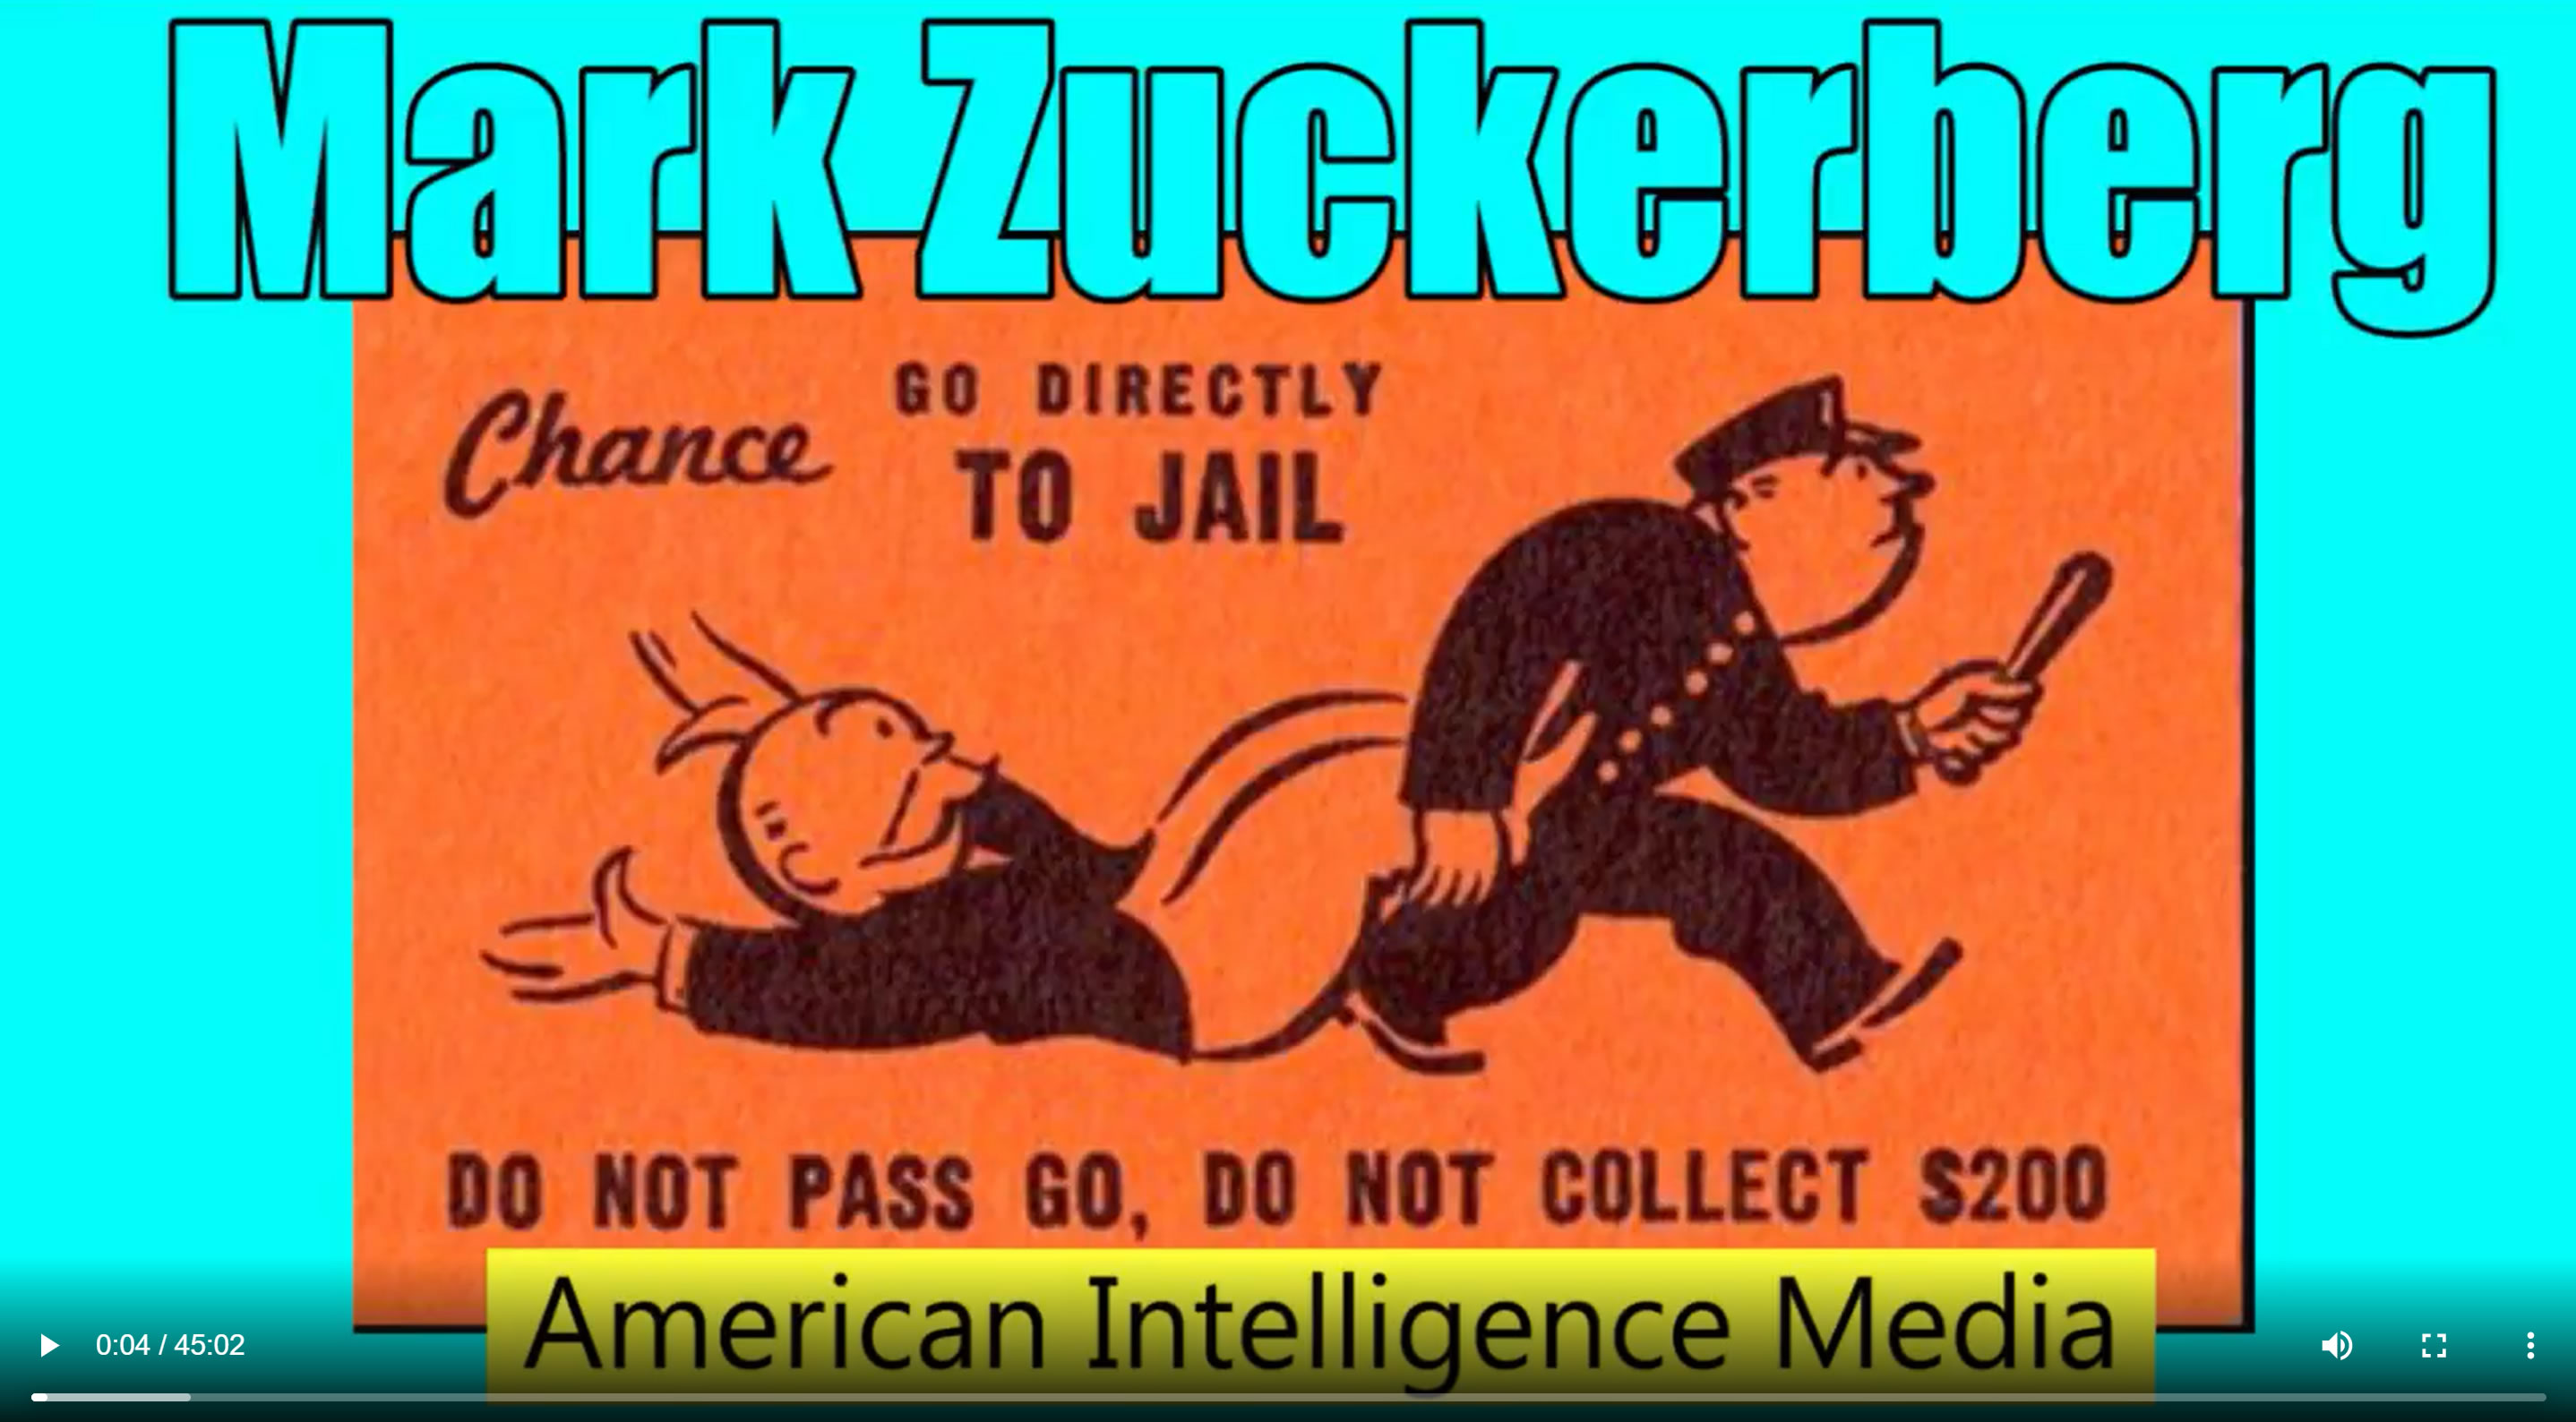 Thomas Paine, Michael McKibben. (Apr. 05, 2018). Facebook Commits Crimes Against the State. American Intelligence Media, Americans for Innovation.